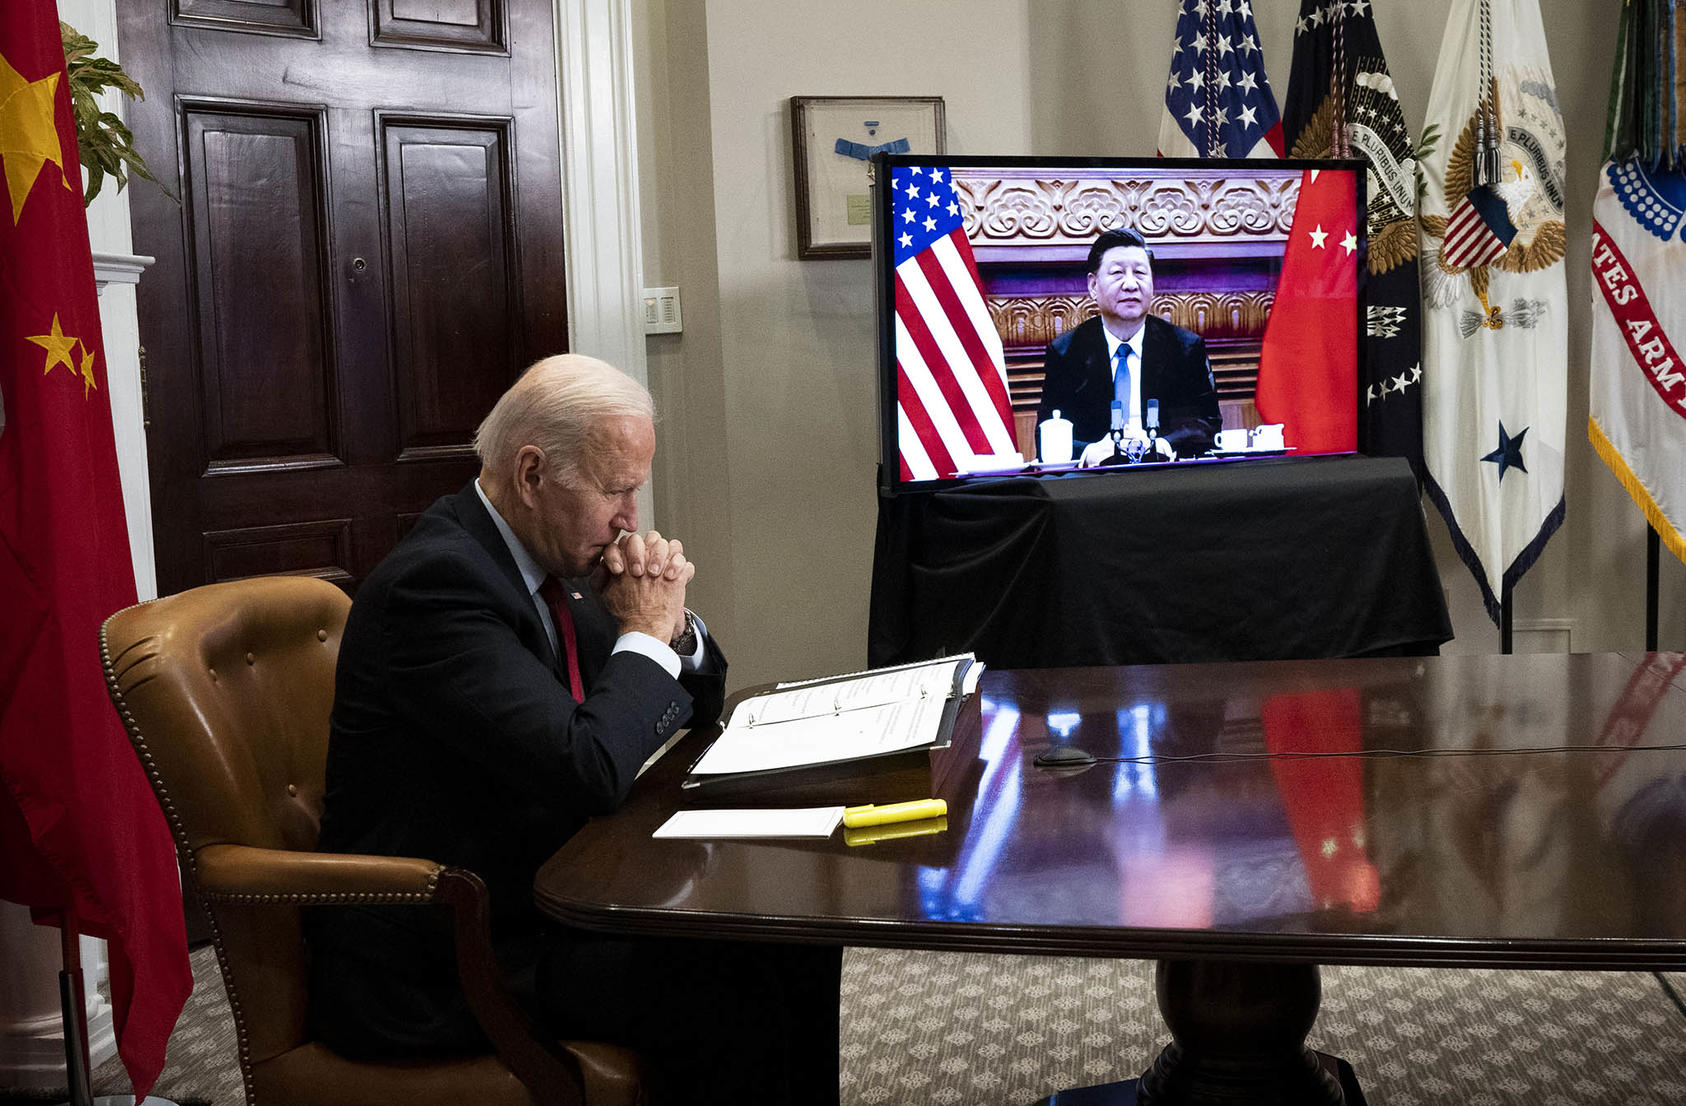 President Joe Biden during a virtual meeting with Xi Jinping, China’s leader, at the White House on Nov. 15, 2021. They have spoken only five times since early 2021. (Doug Mills/The New York Times)